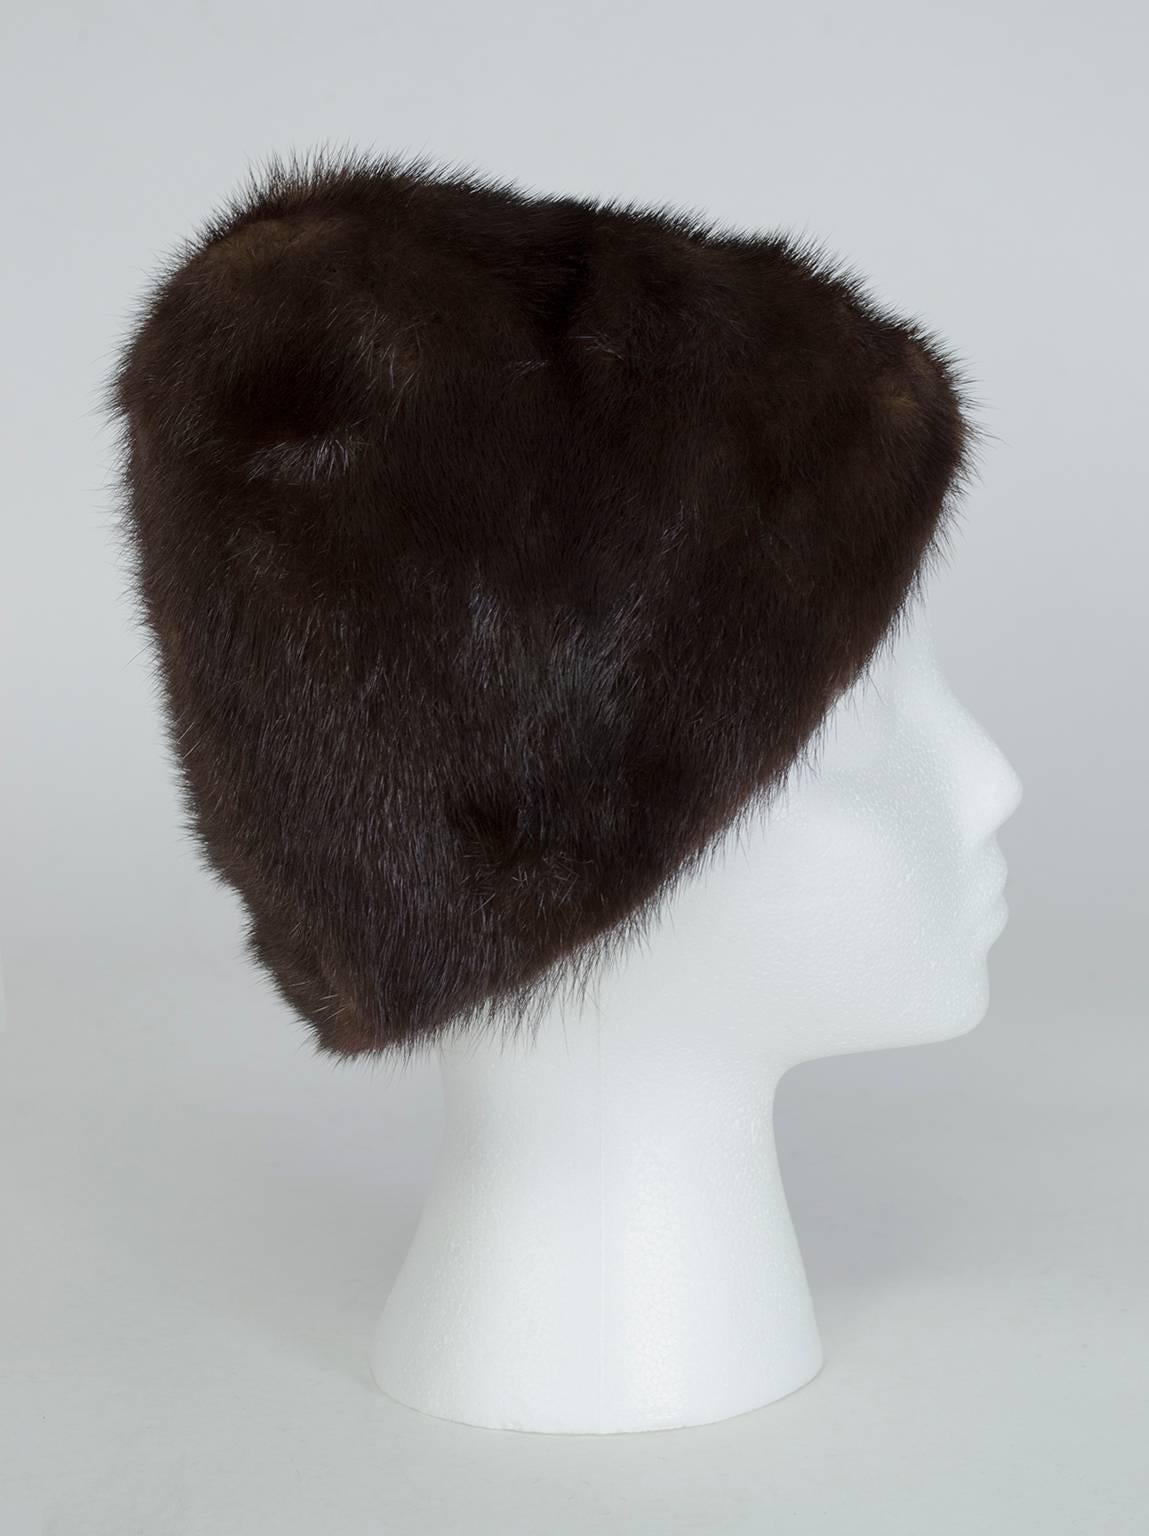 Peak hats immediately conjure the image of a young Audrey Hepburn, and this one is no exception. In supple inky brown (almost black) mink fur, this is a hat that will make you stand a little straighter, walk a little taller, and add a few inches to